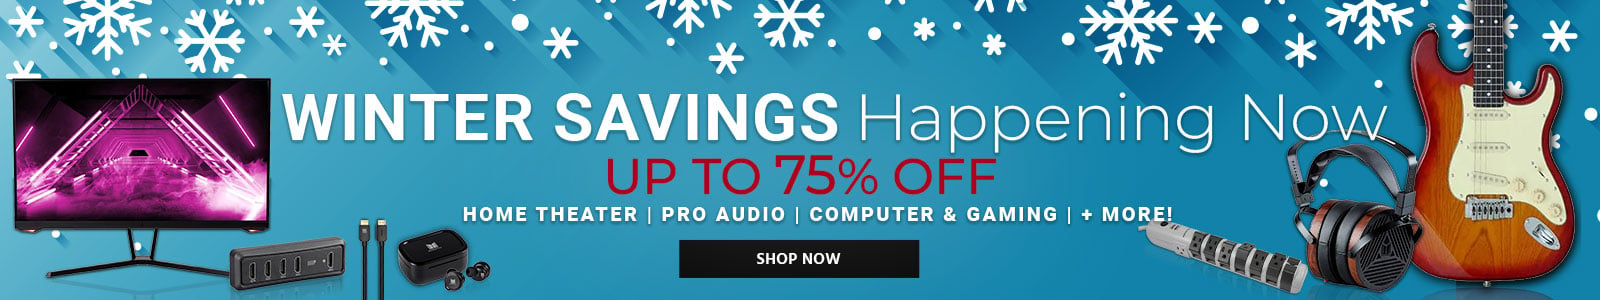 Winter Savings Happening Now
Up To 75% Off
Home Theater | Pro Audio | Computer & Gaming | + More!
Shop Now